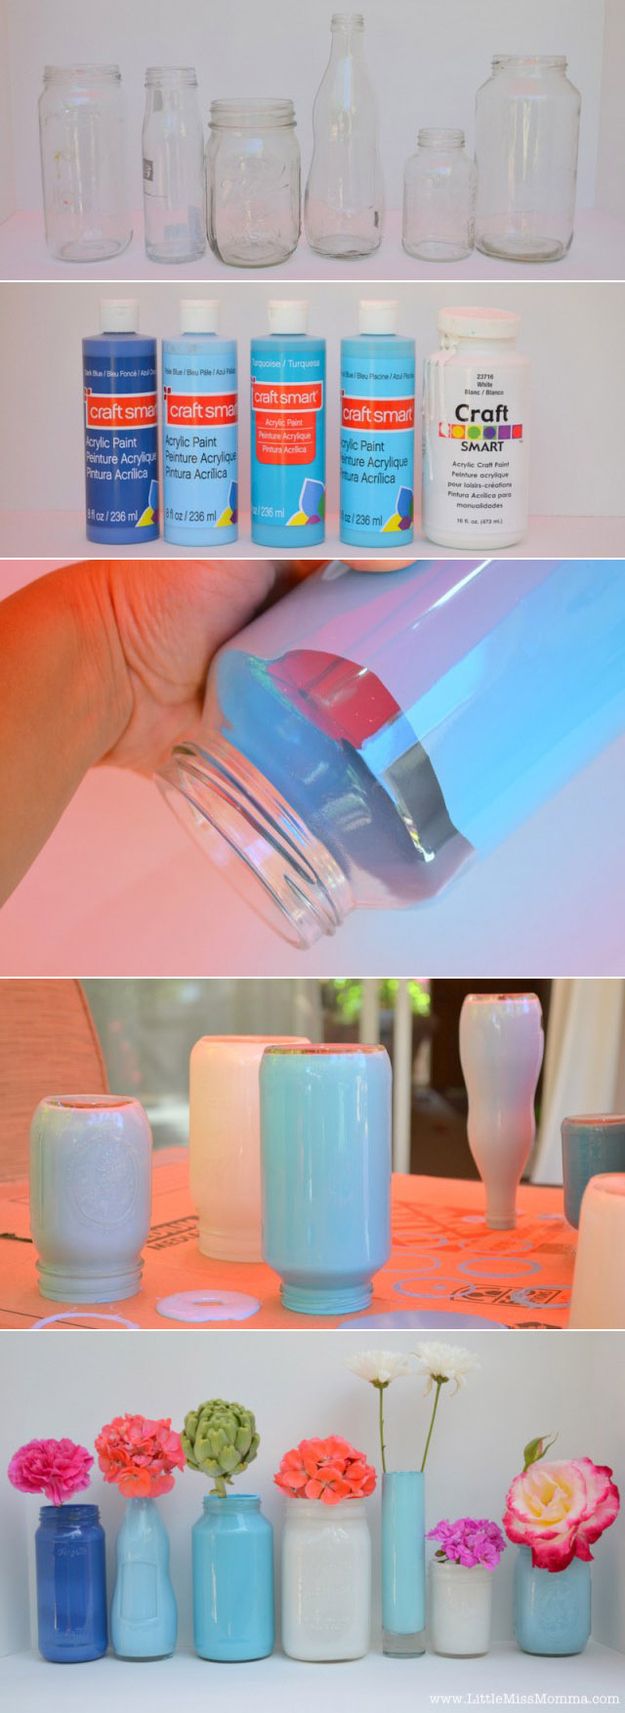 14. Painted Vases -   42 Easy Things To Do With Mason Jars